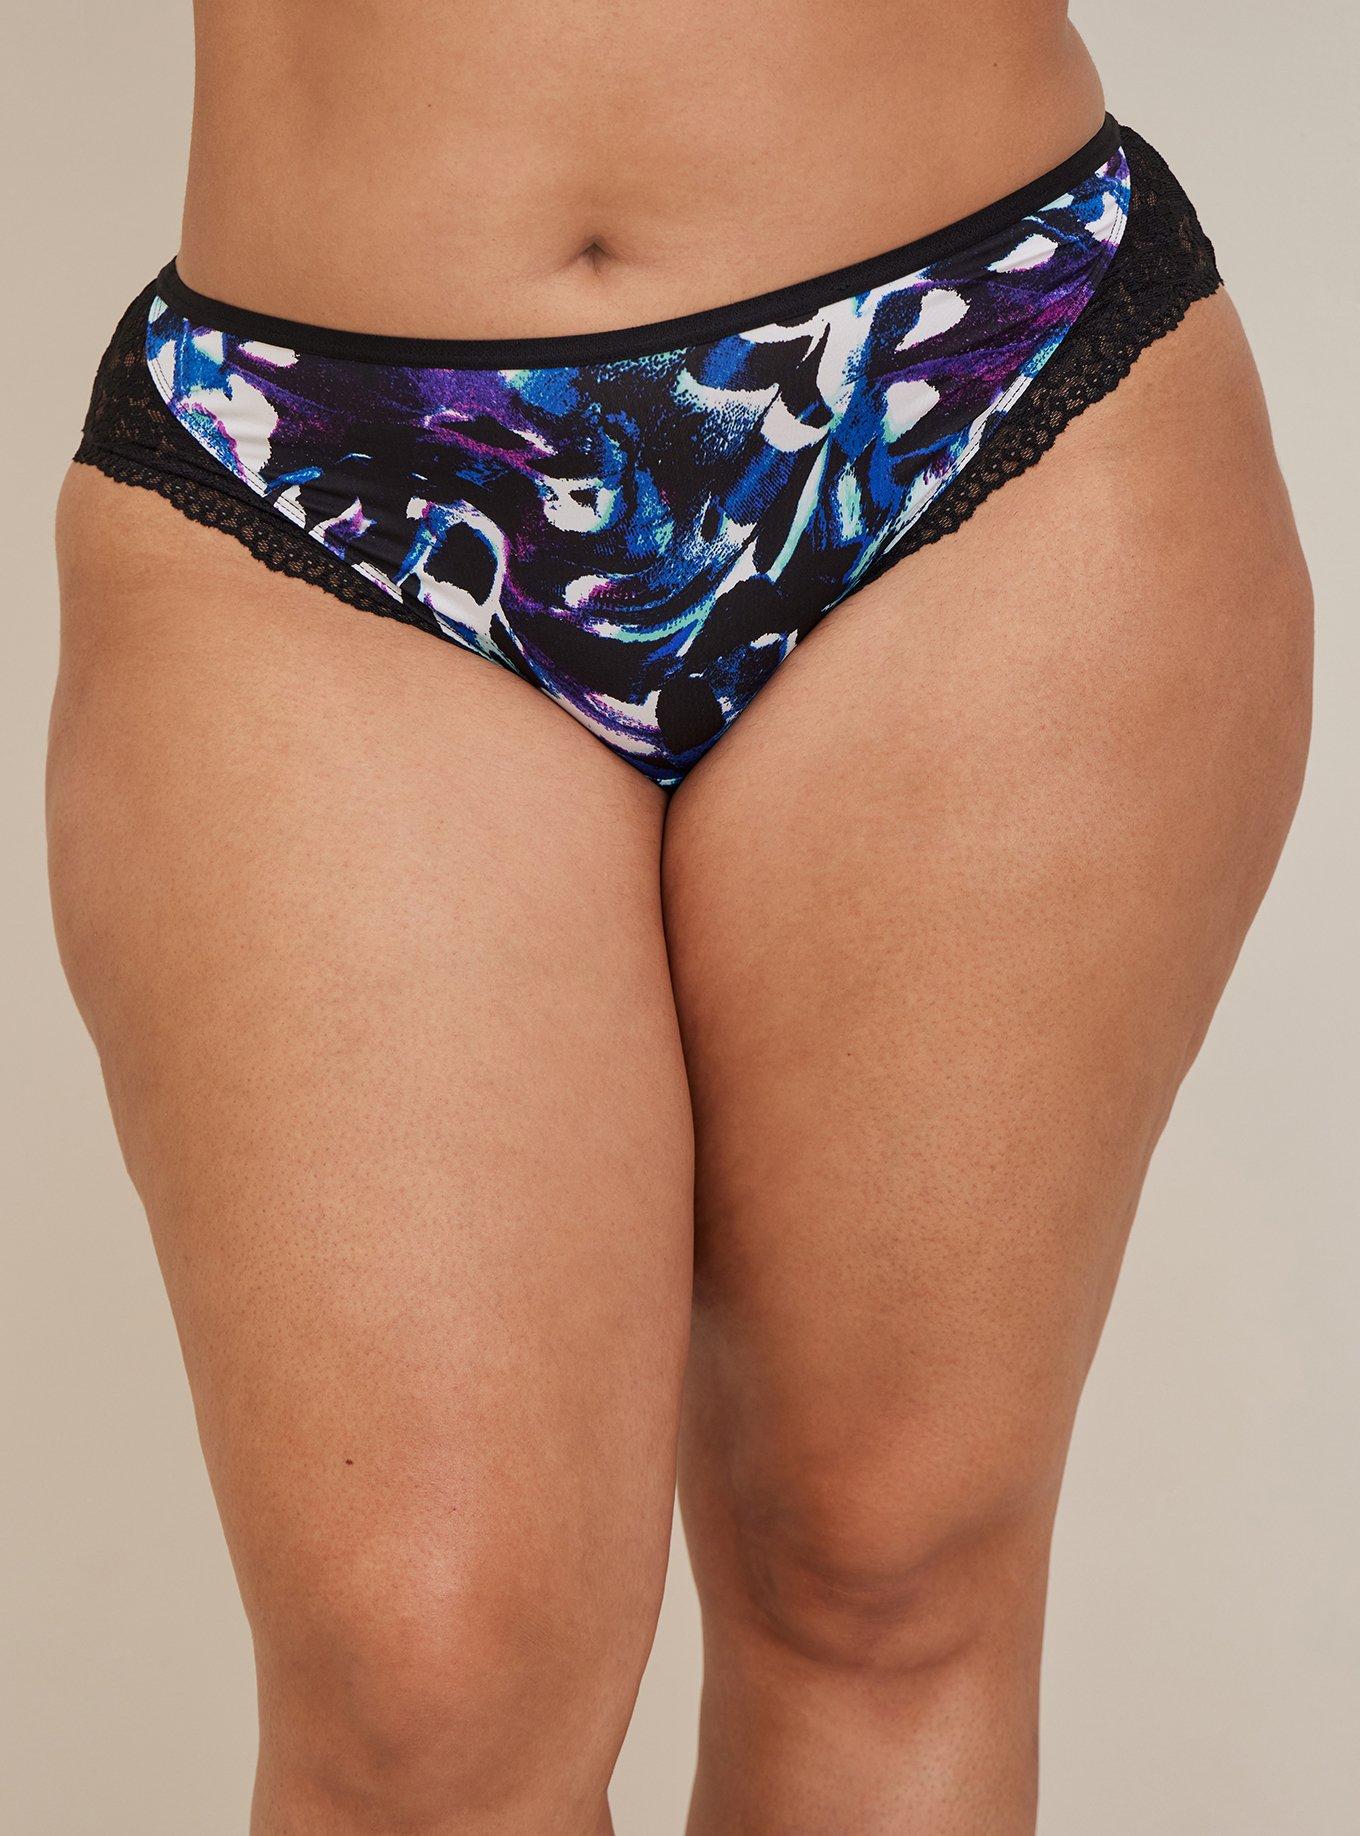 Plus Size - Cage Back Brief Panty - Lace & Microfiber Heather Grey - Torrid